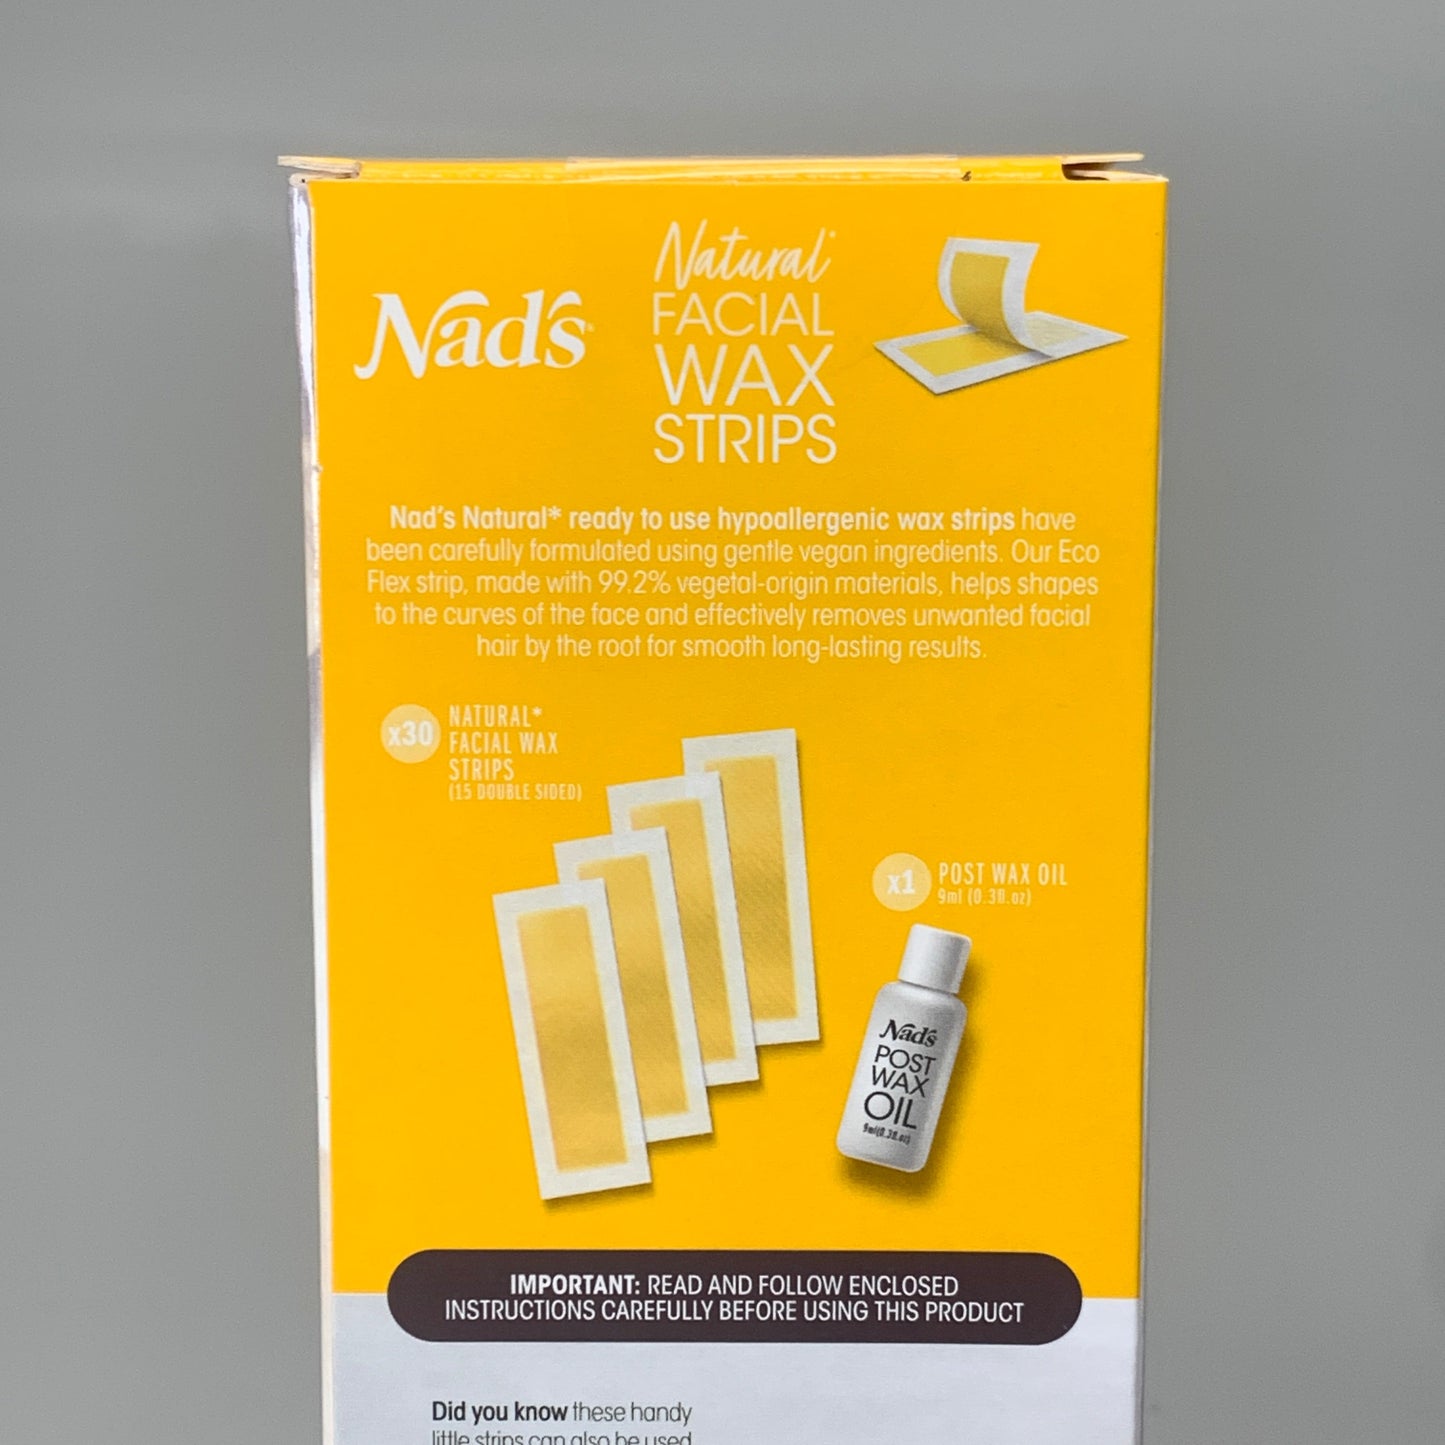 NADS Natural Facial Wax Strips Vegan With Post Wax Oil 6501EN06 (New)